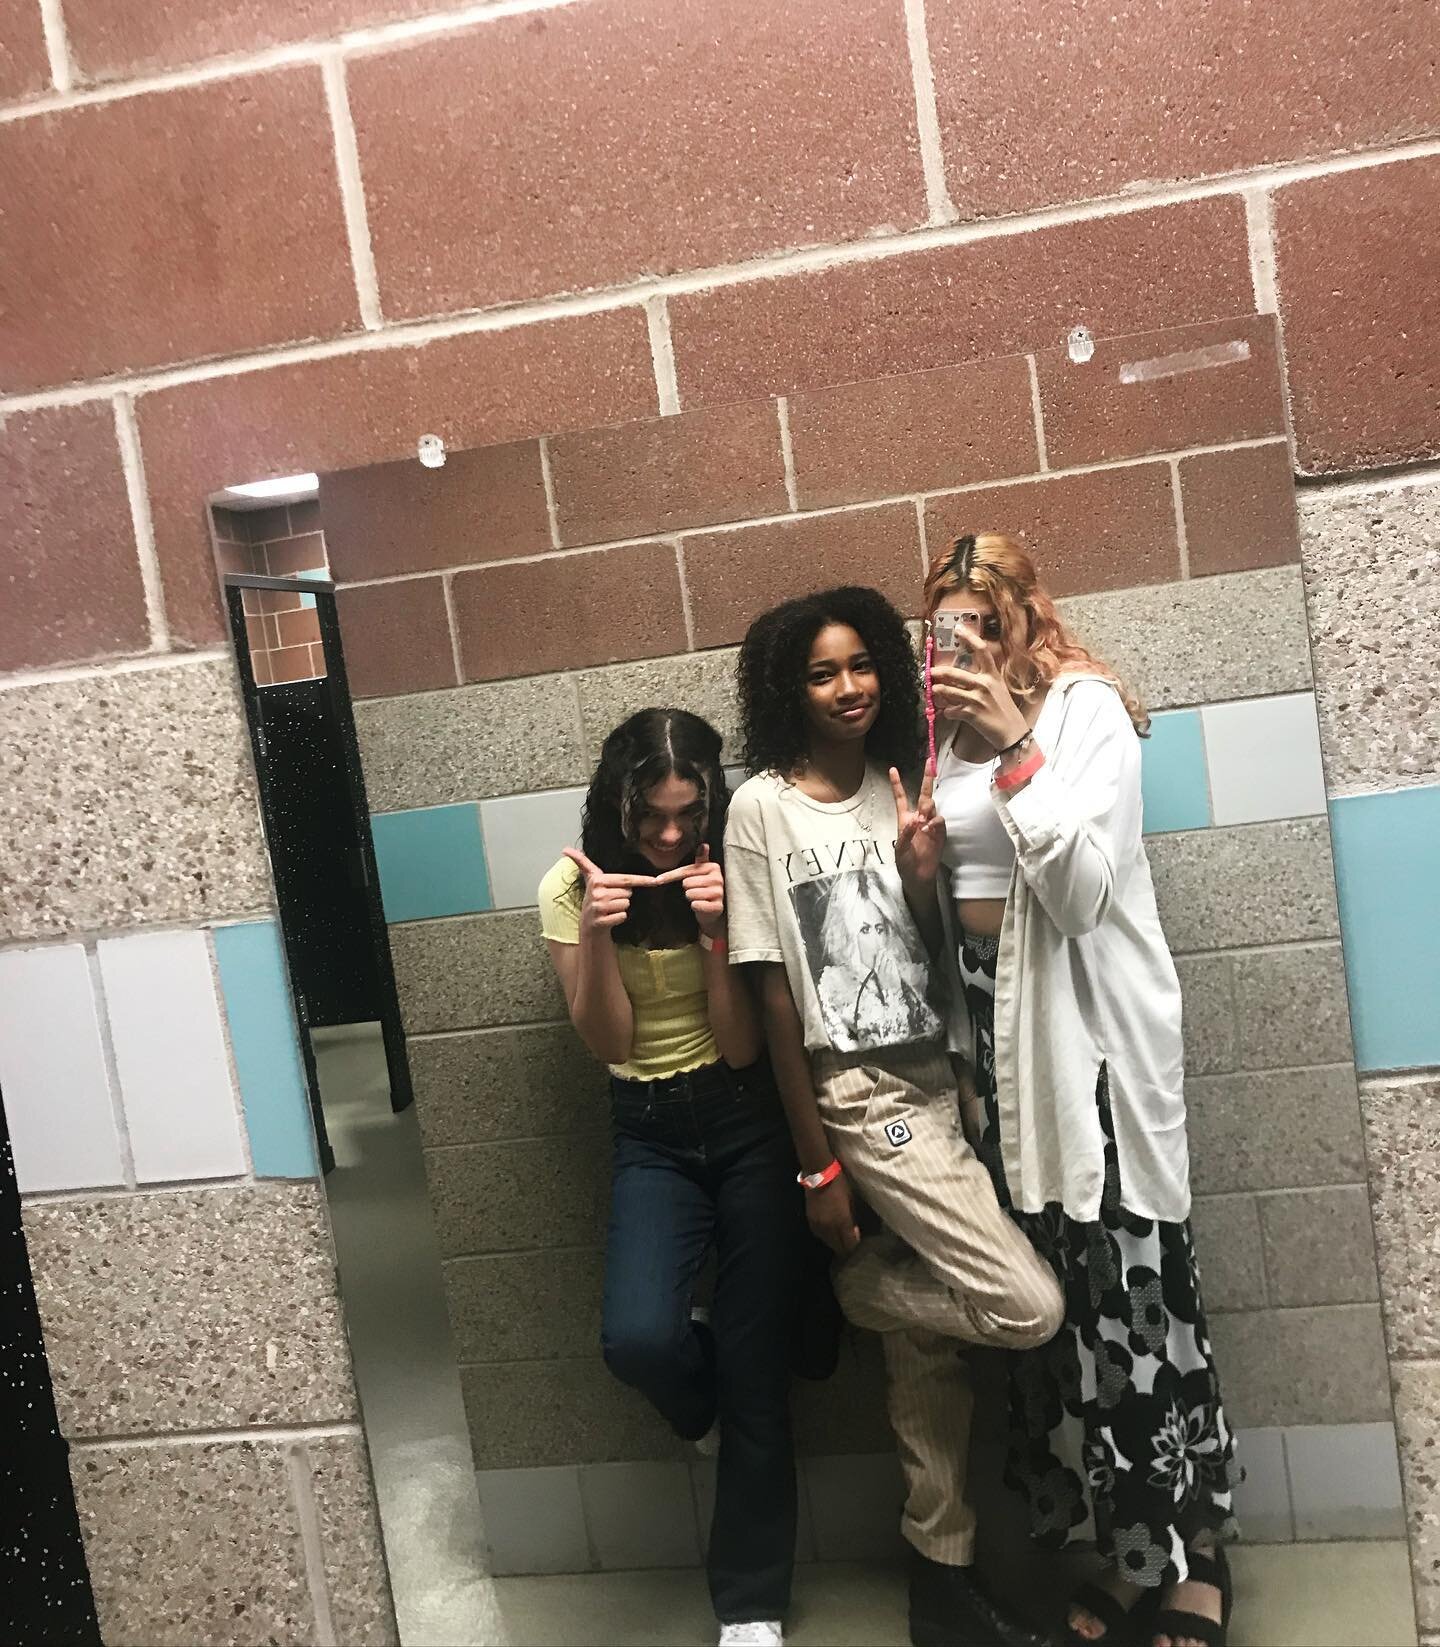 My girlz 💕💕.
New school orientation with Cora&rsquo;s bestie/
Declared the bathroom &ldquo;really nice&rdquo;/
Ordered pink locks for lockers/
7th and 9th grade ready.